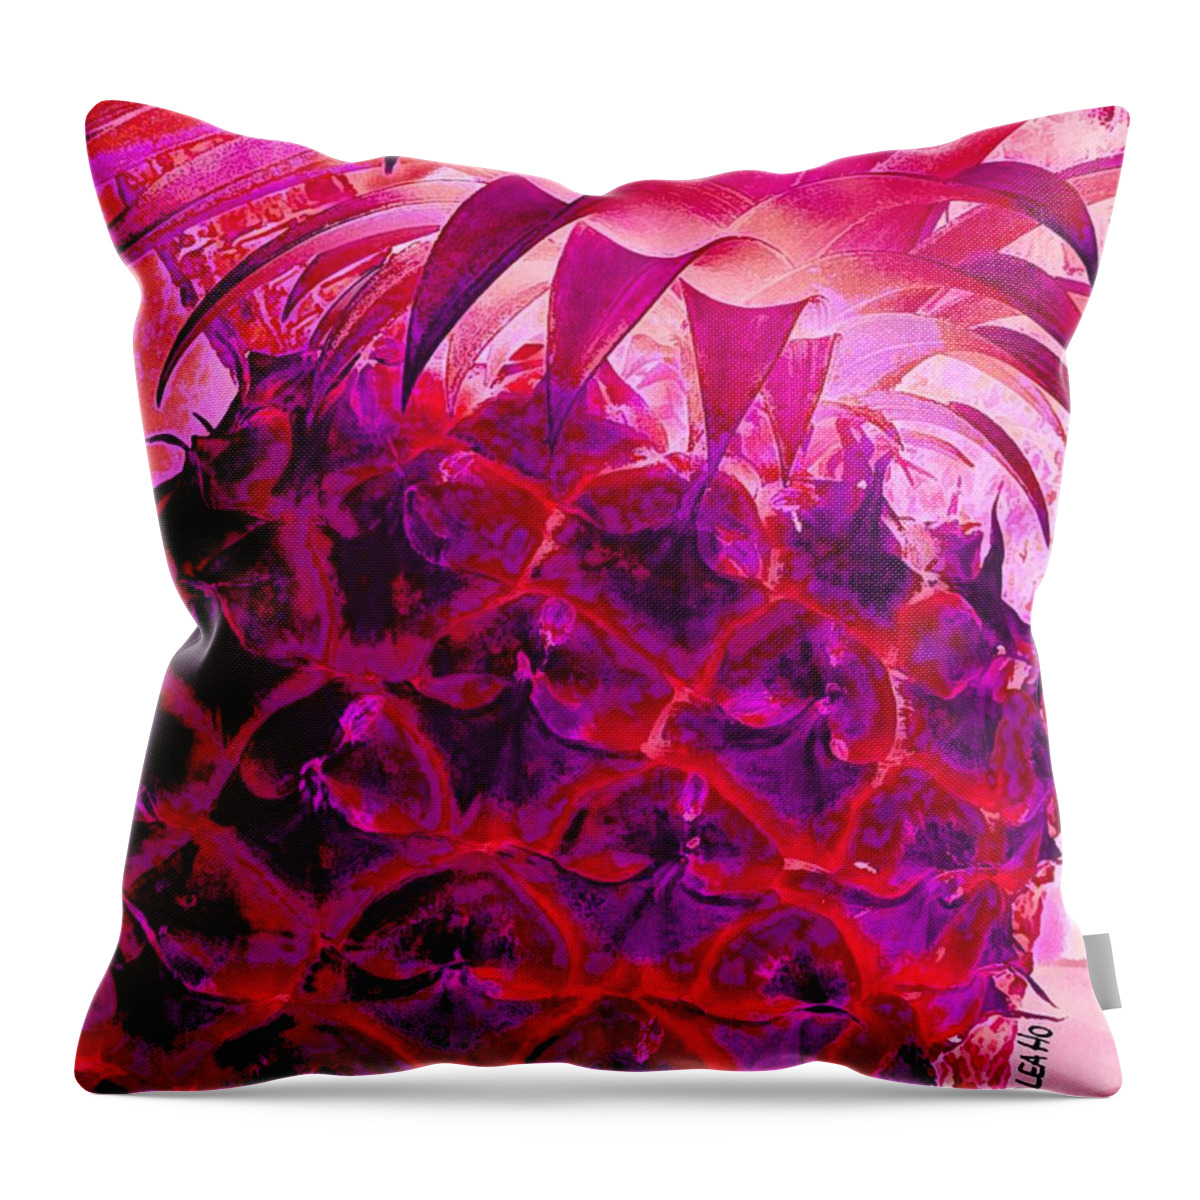 Hawaii Throw Pillow featuring the digital art Red Pineapple by Dorlea Ho